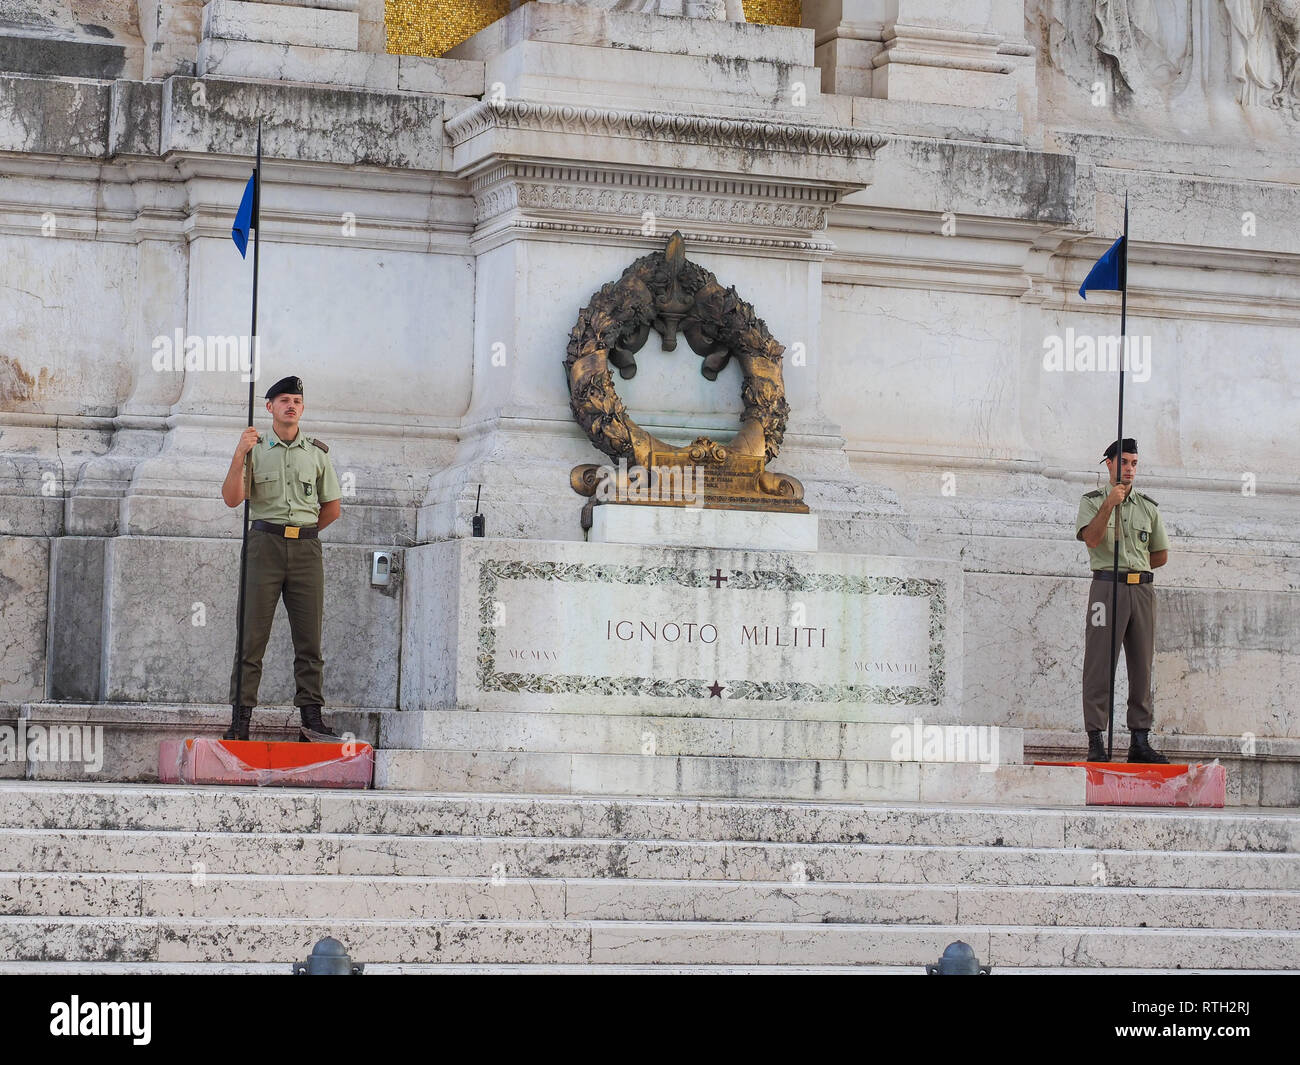 Amazing and majestic Vittorio Emanuele II Monument or Altare della Patria. Tomb of Unknown Soldier with honorary guards on both sides. Piazza Venezia. Stock Photo